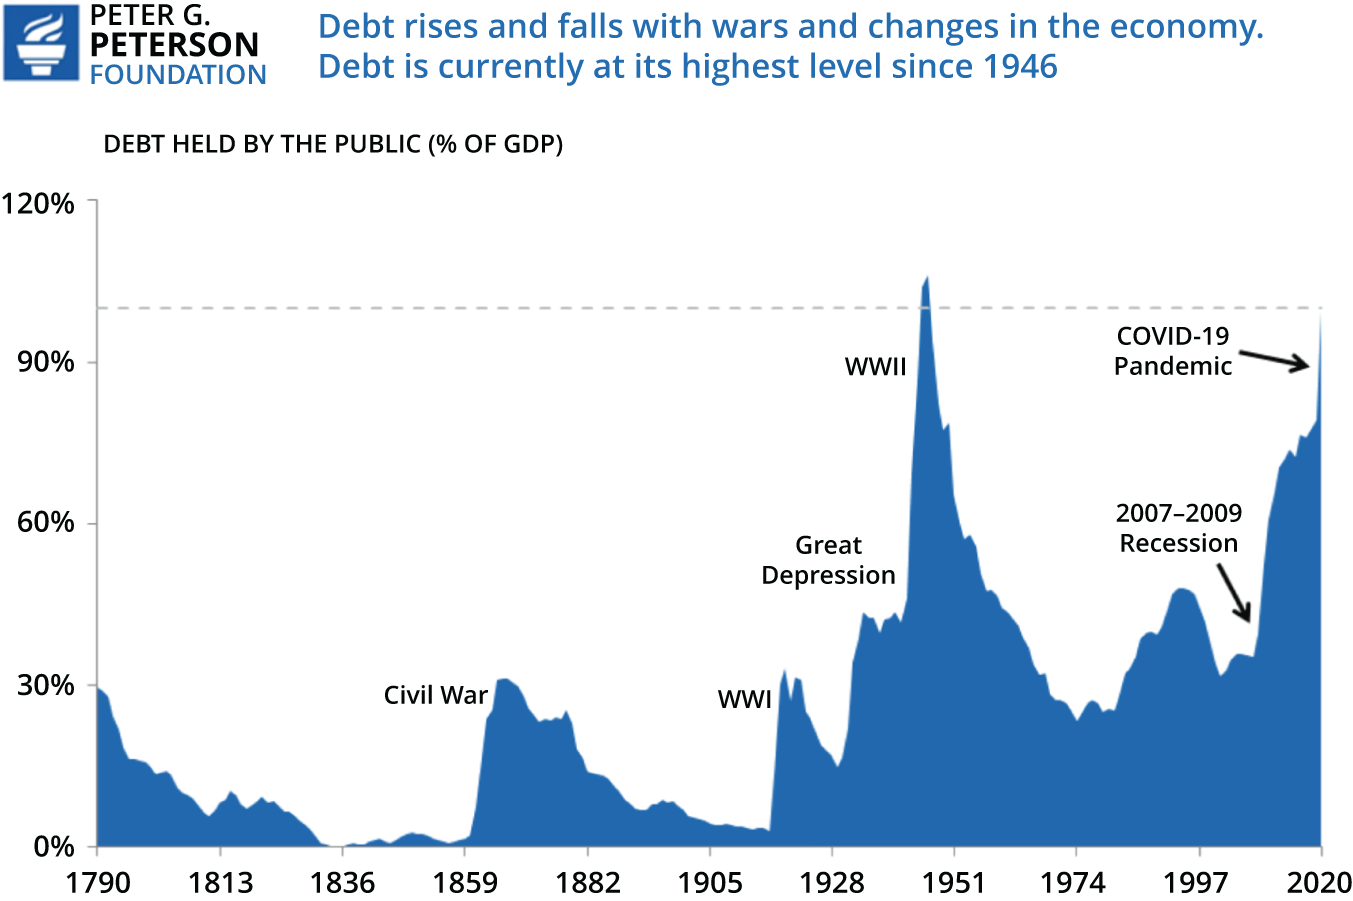 A graph compares debt held by the public over years from 1790 to 2020.